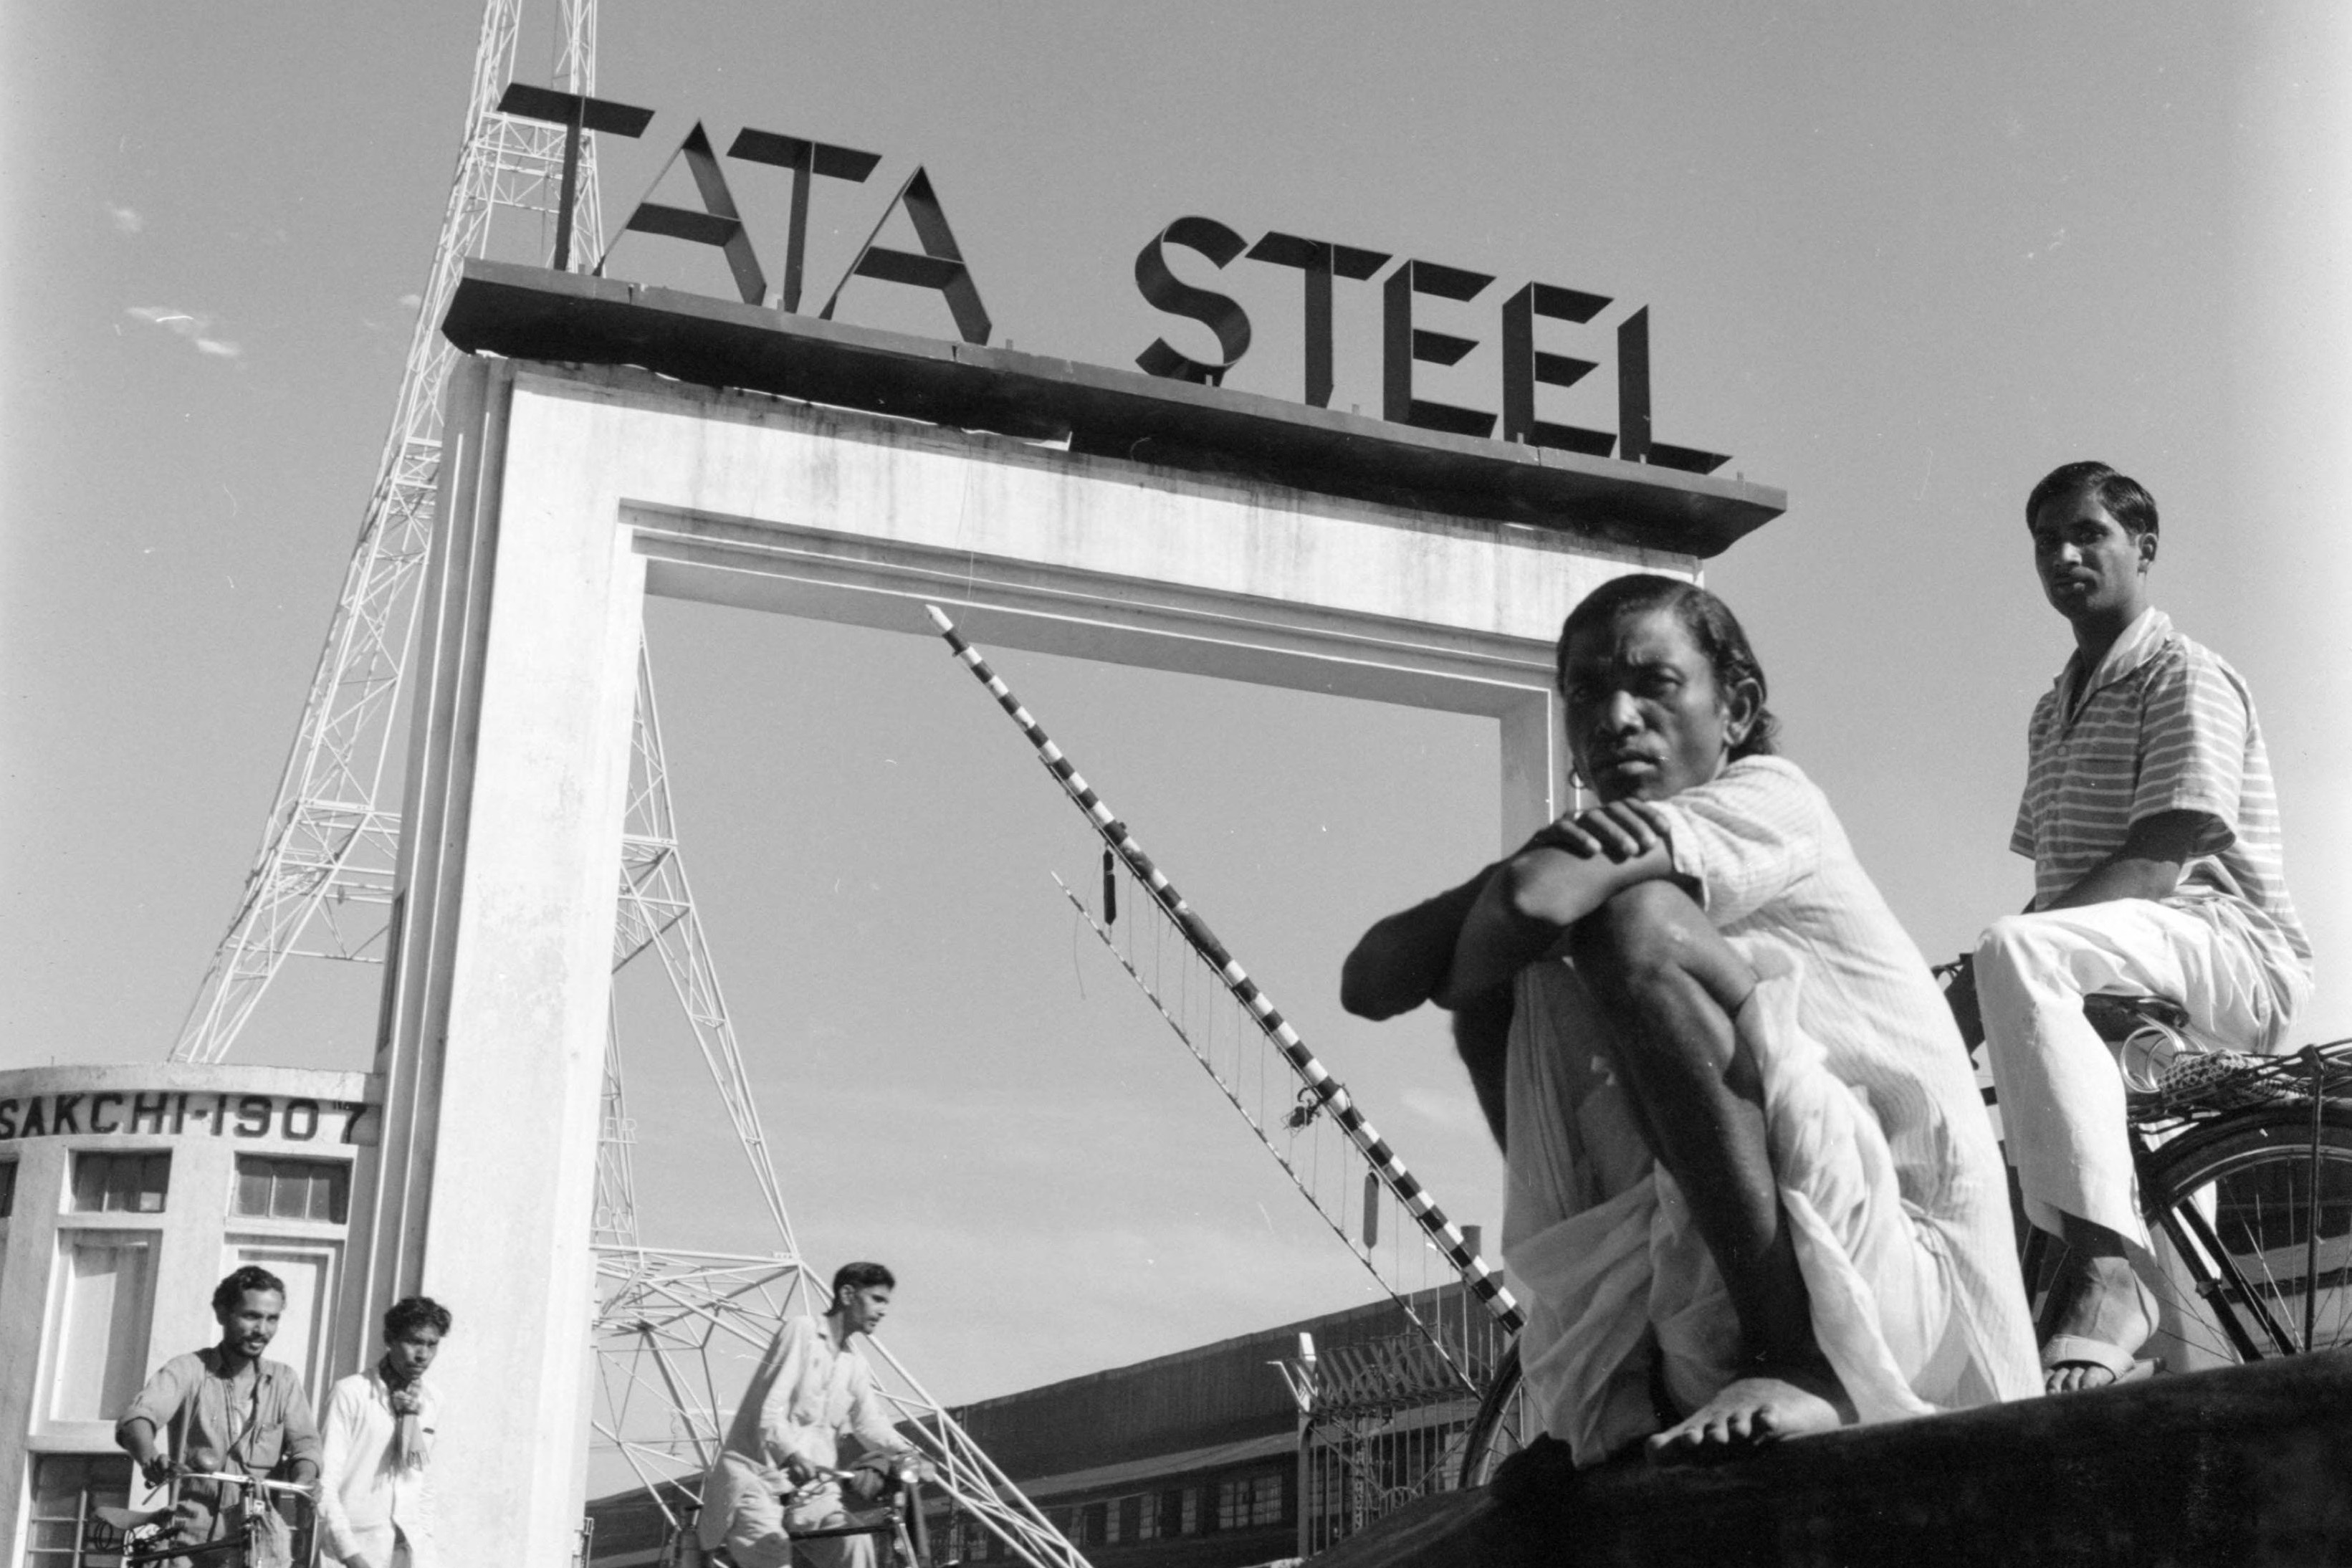 A photograph shows the entrance to Tata Steel in Jamshedpur. There is a large sign that reads, “TATA STEEL.” Two people are sitting below it and looking toward the camera. More people are walking through the entryway in the distance.